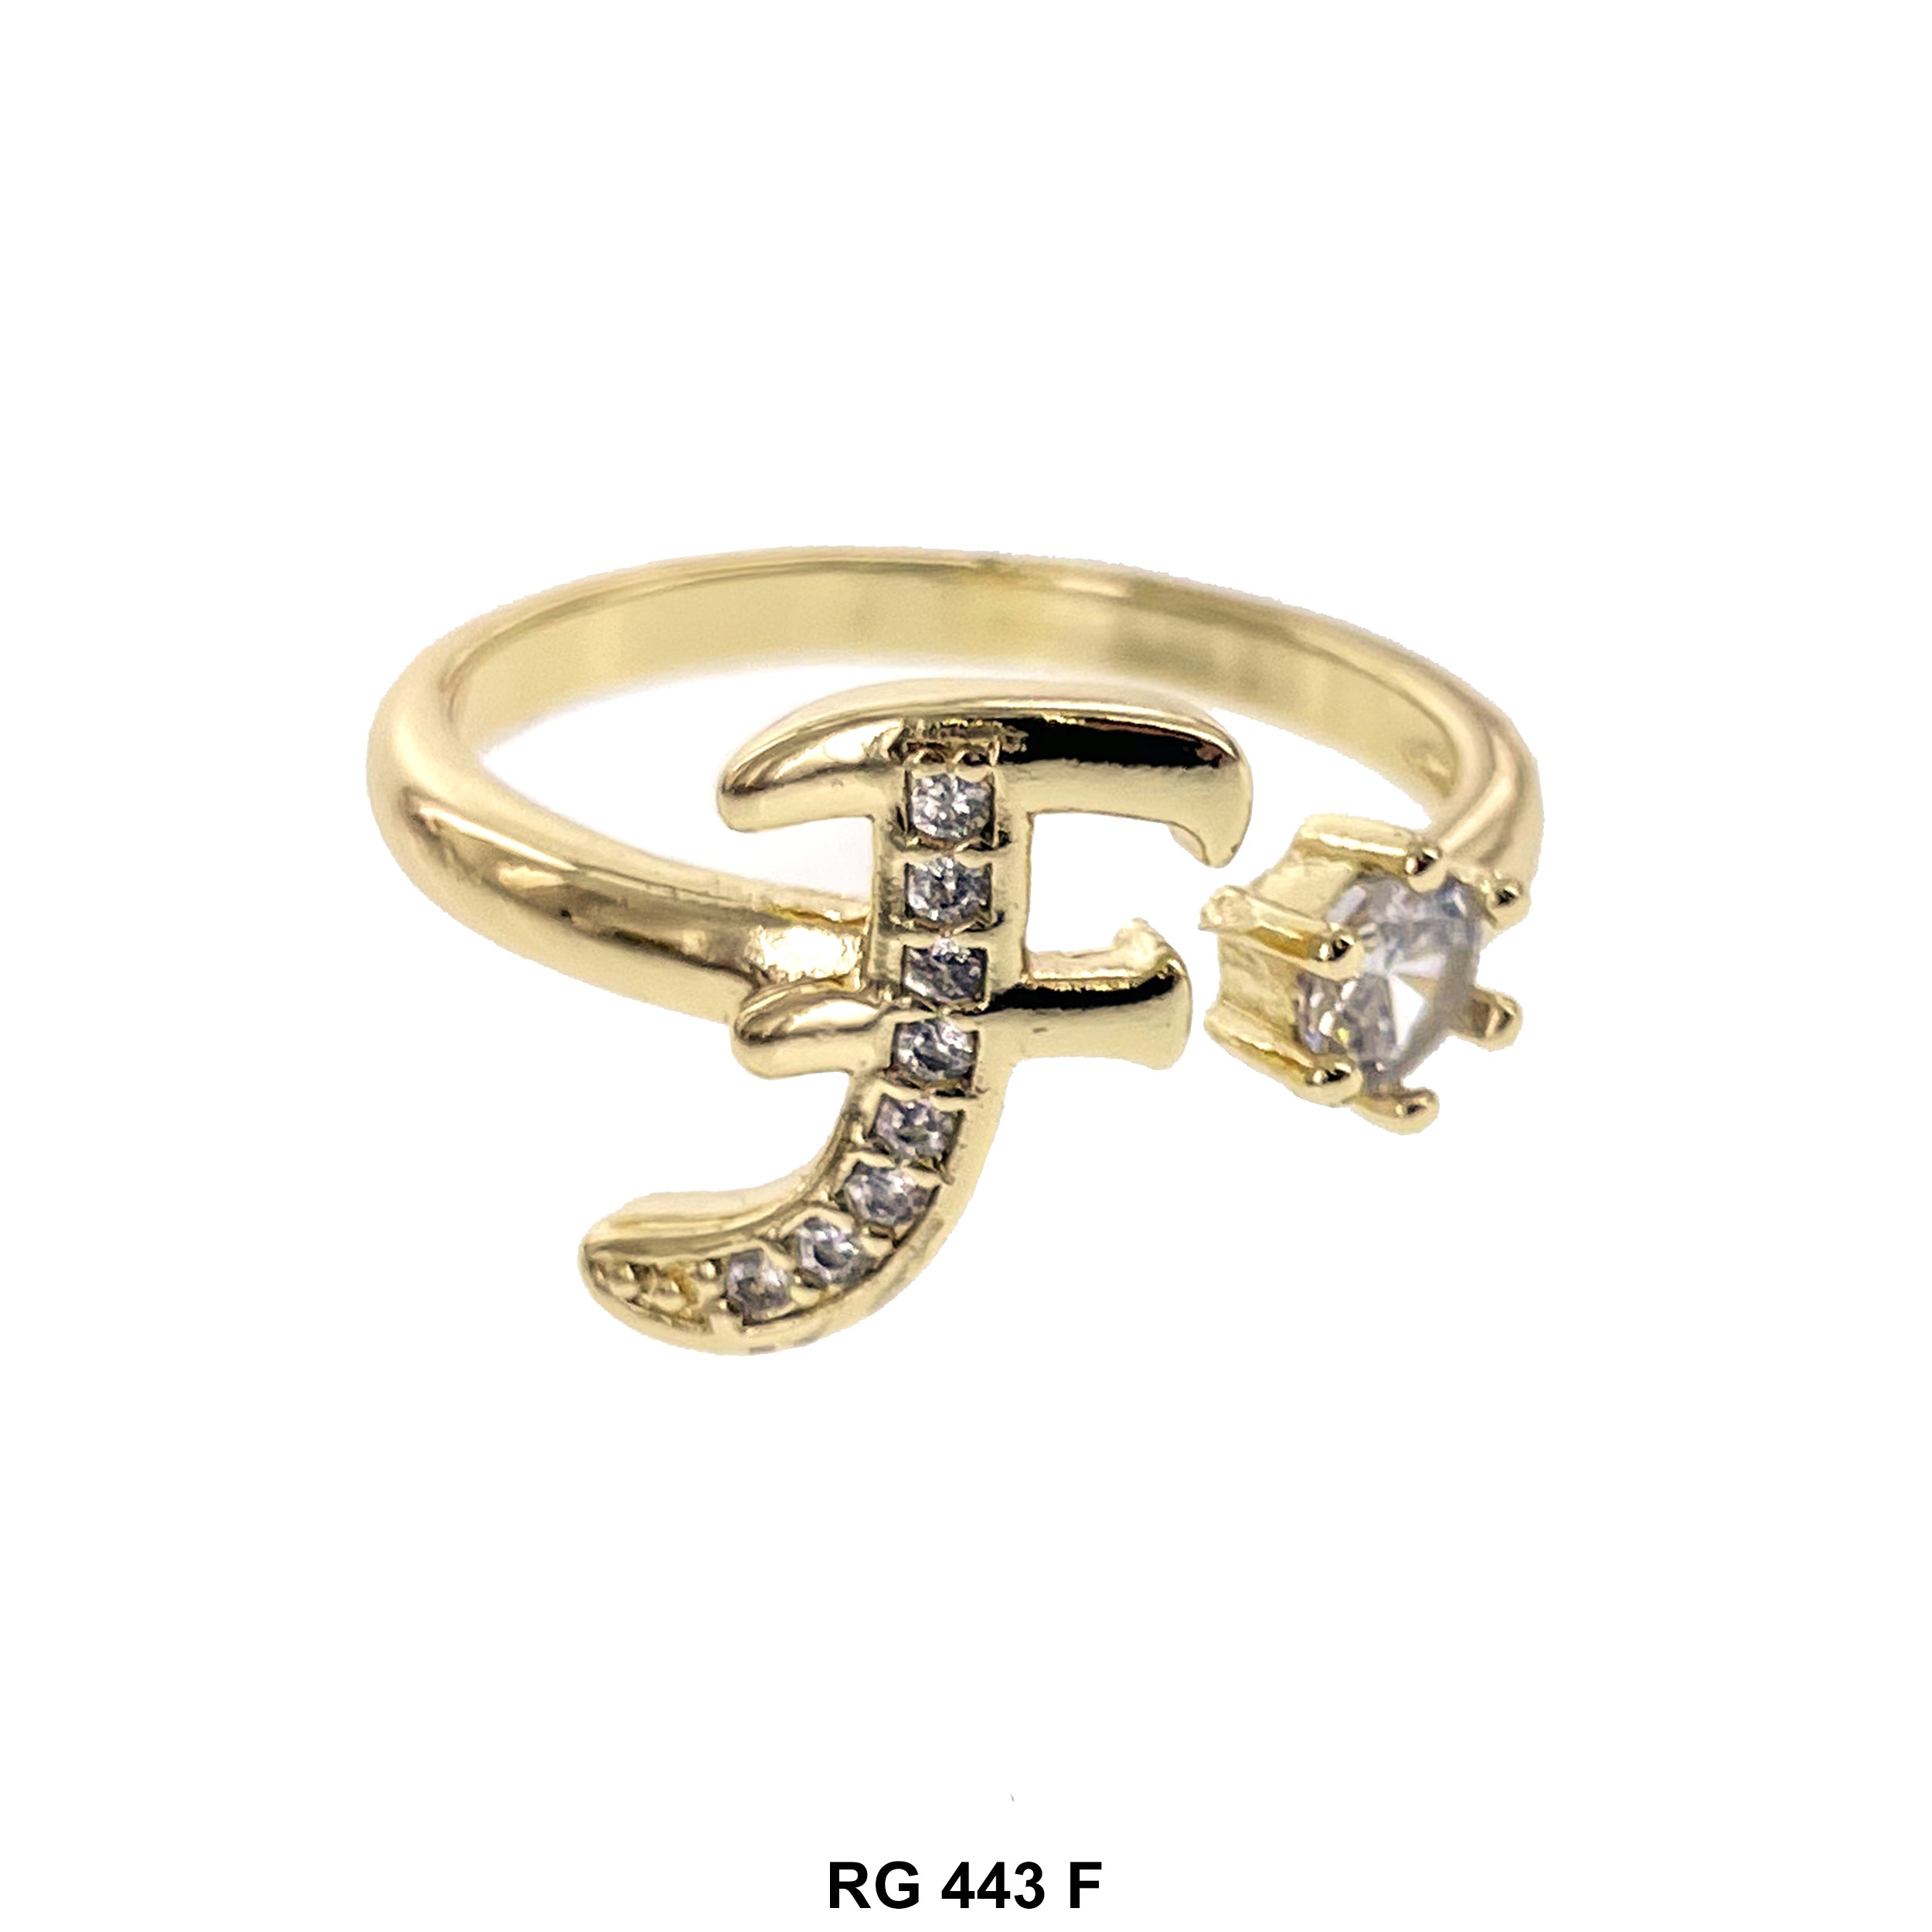 Initial Adjustable Ring RG 443 F